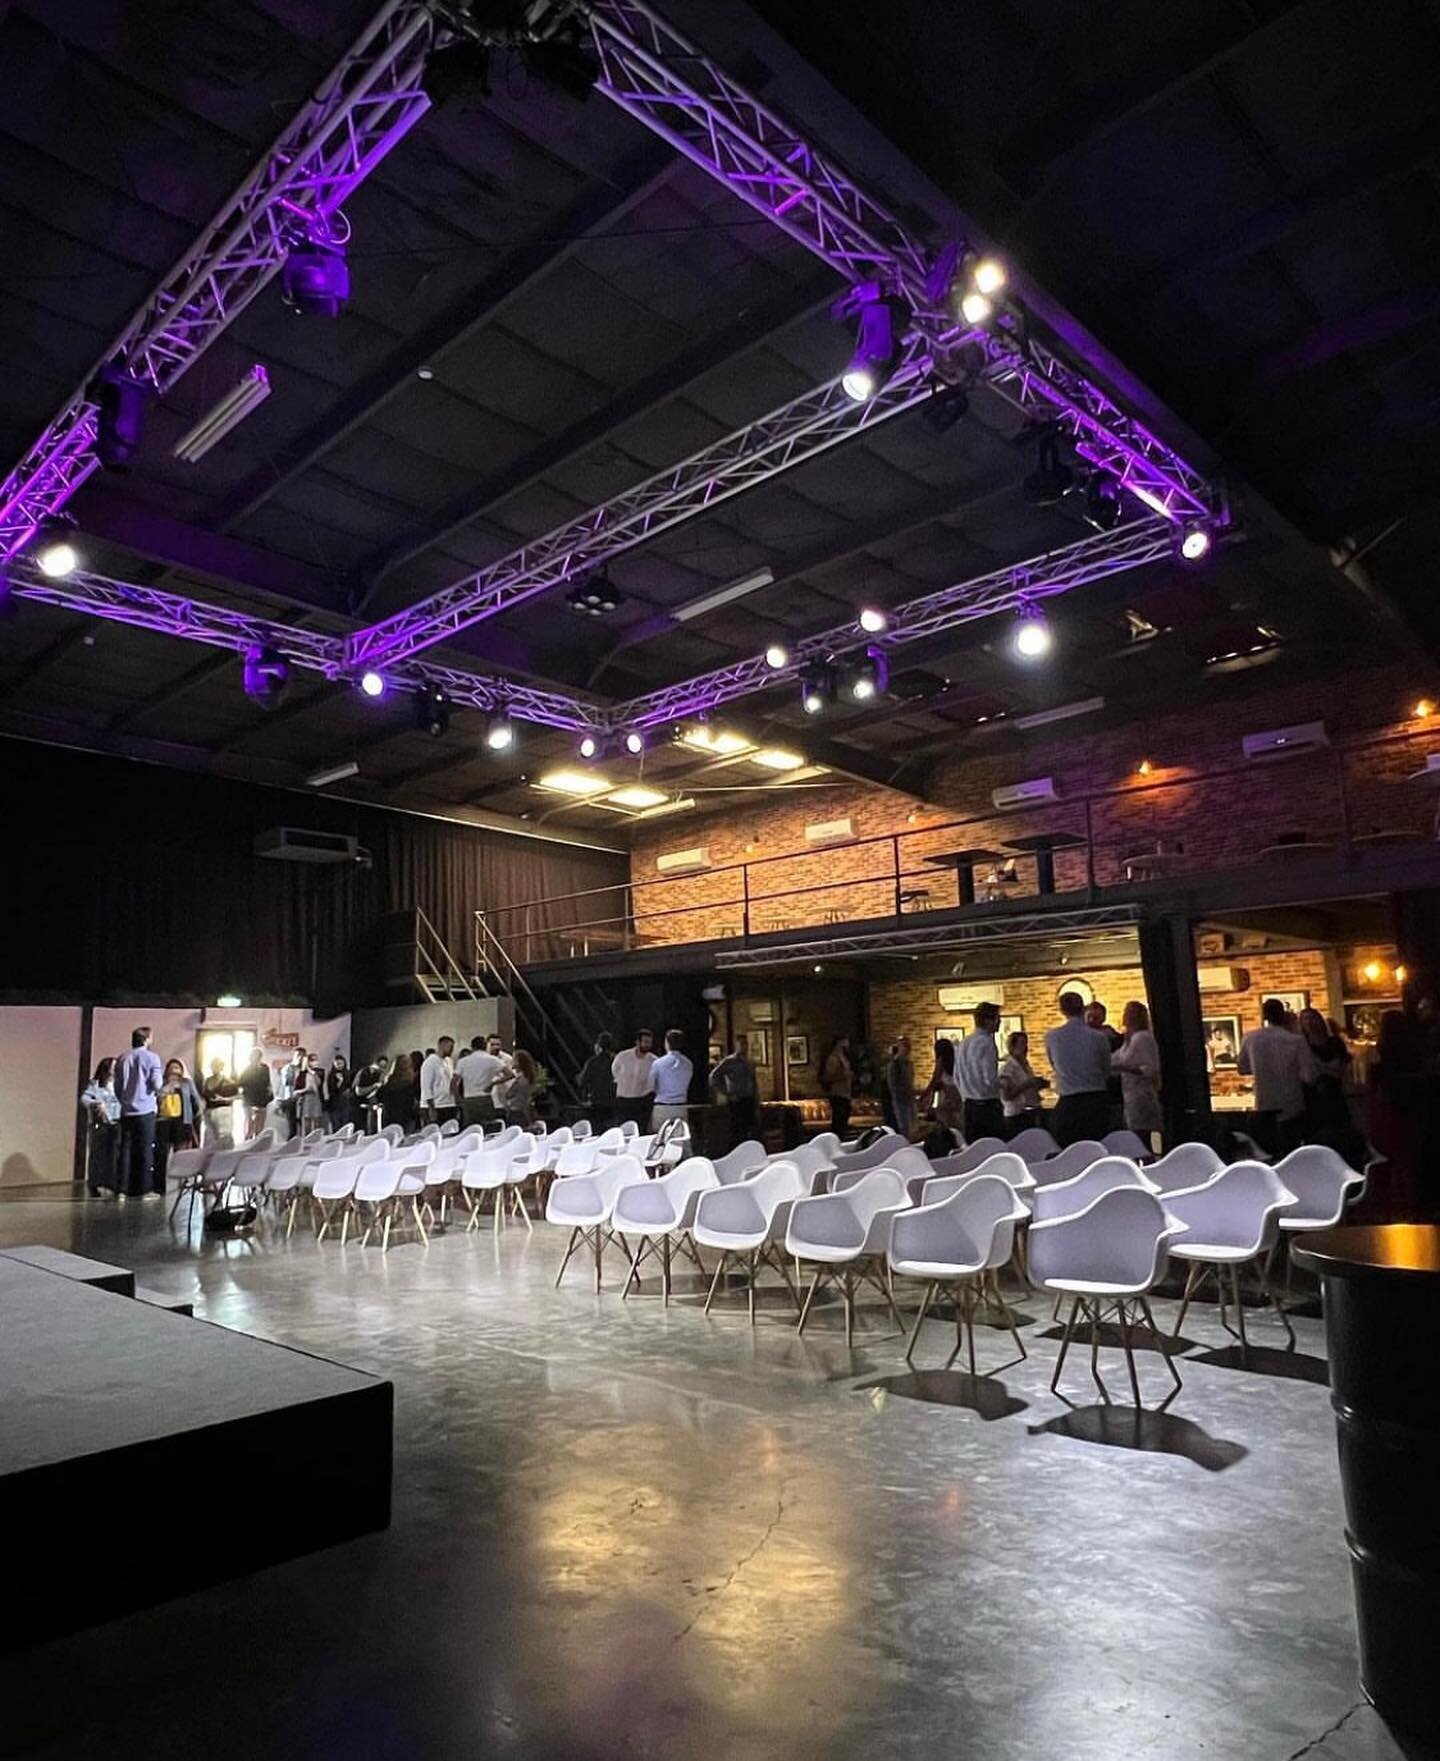 Great little set-up for a training event last week for one of our clients!

#training #event #venue #seminar #workshop #warehousefour #dubai #uae